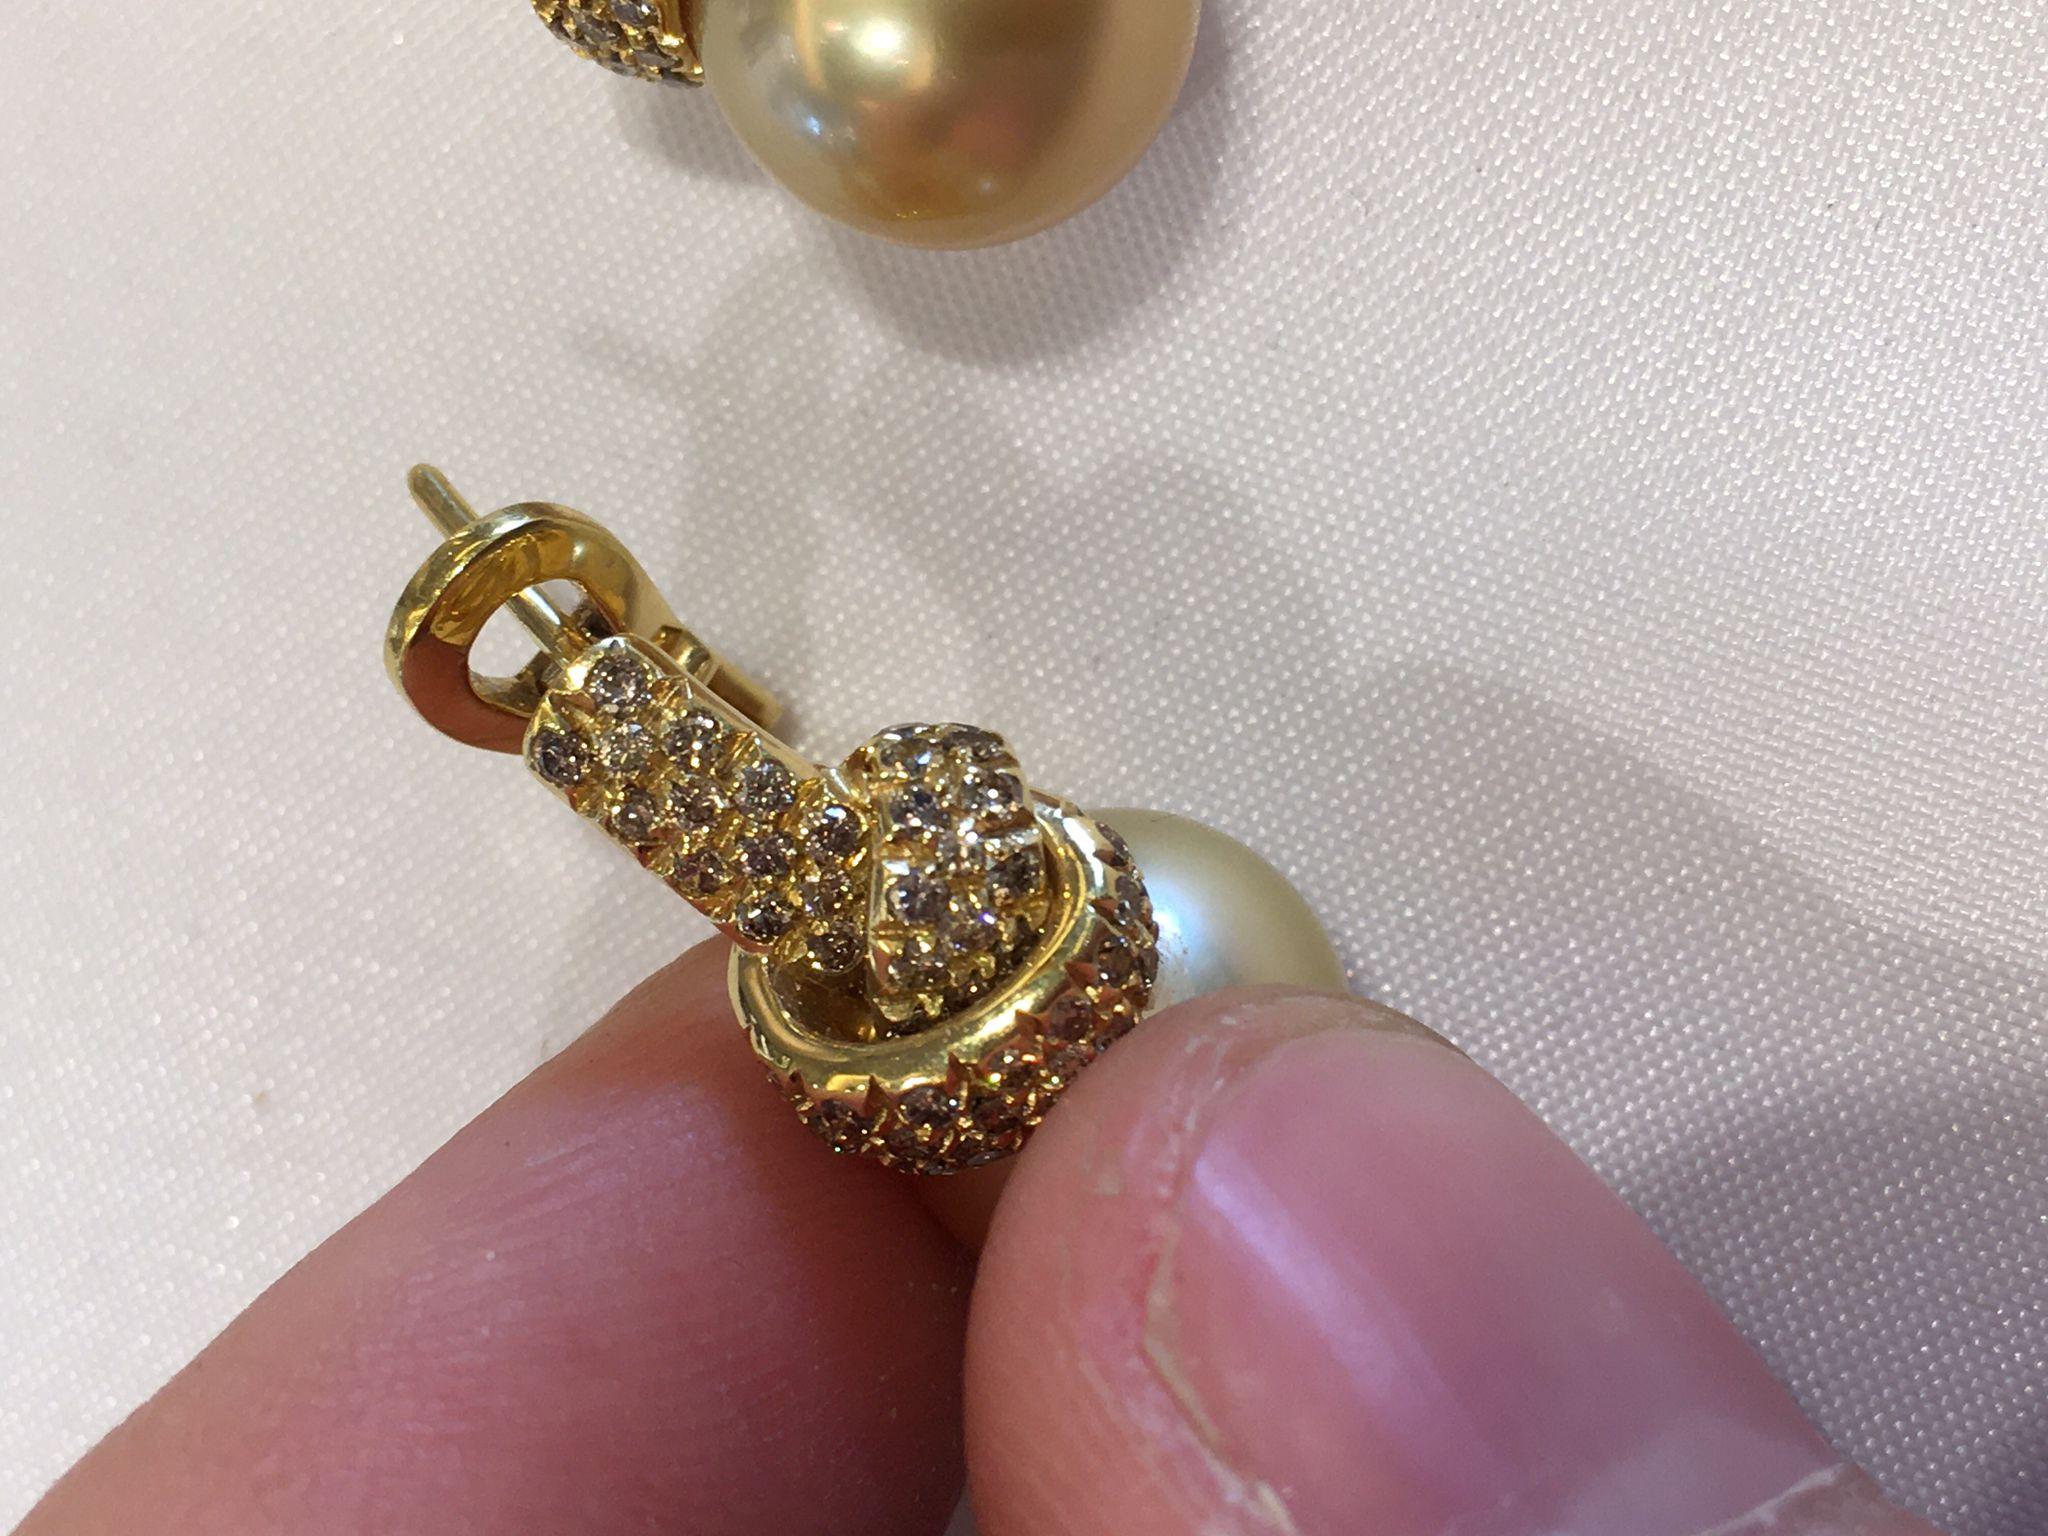 A beautiful pair of earring by mikimoto.
this pair of earring comes in 18kt yellow gold with a stunning pair of 5+A yellow gold pearls from South Sea in Australia and diamonds.
